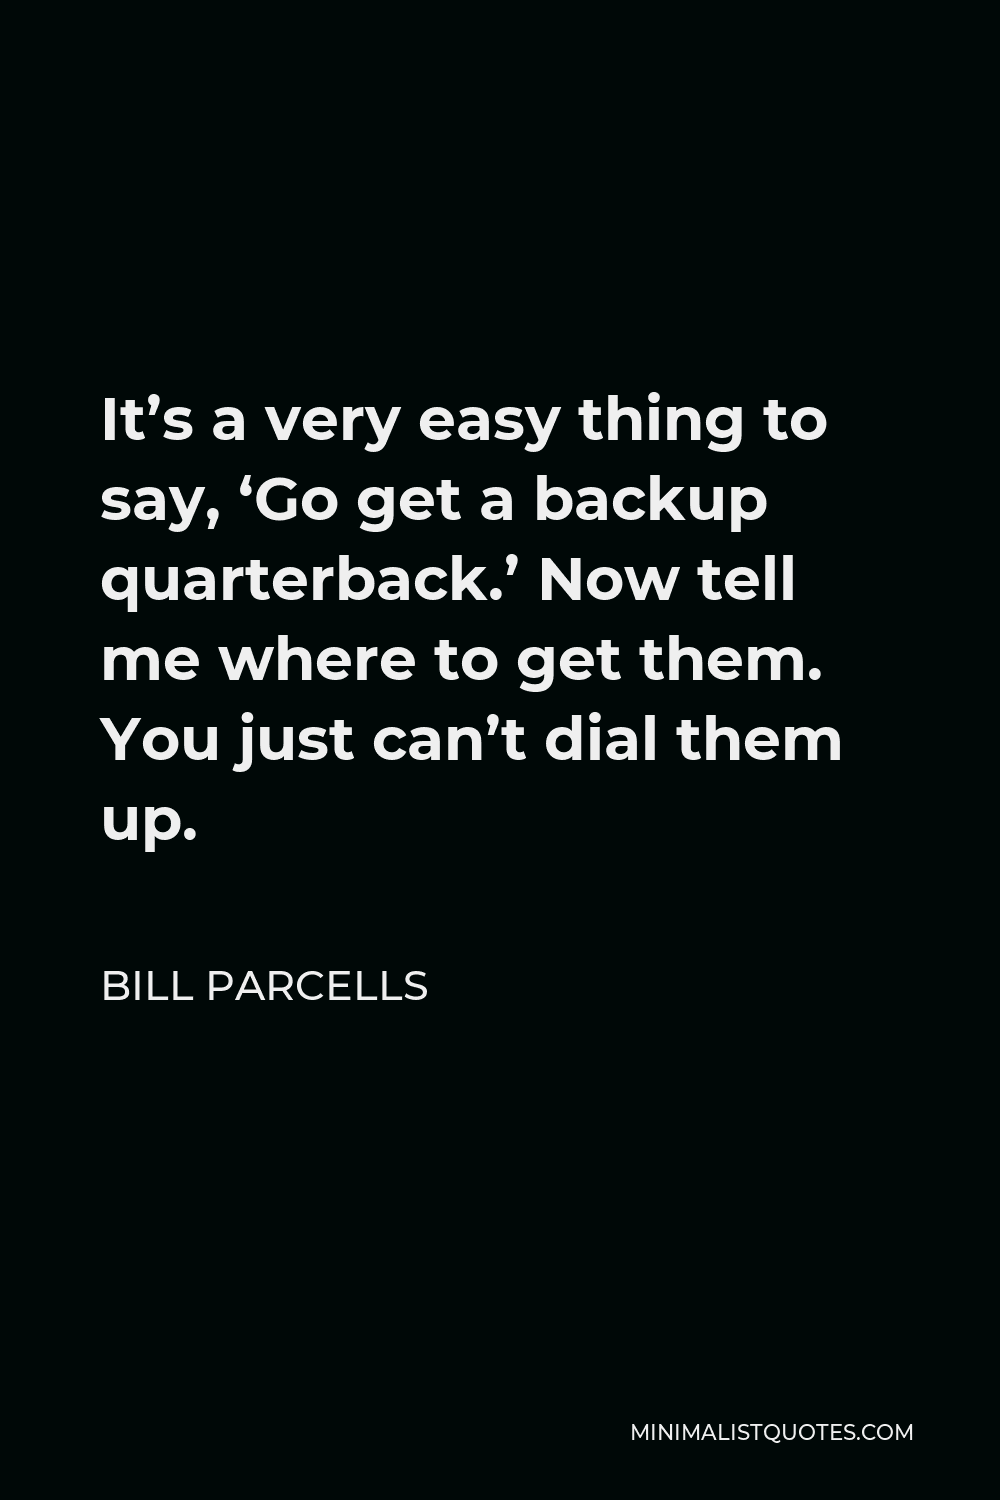 Bill Parcells Quote - It’s a very easy thing to say, ‘Go get a backup quarterback.’ Now tell me where to get them. You just can’t dial them up.